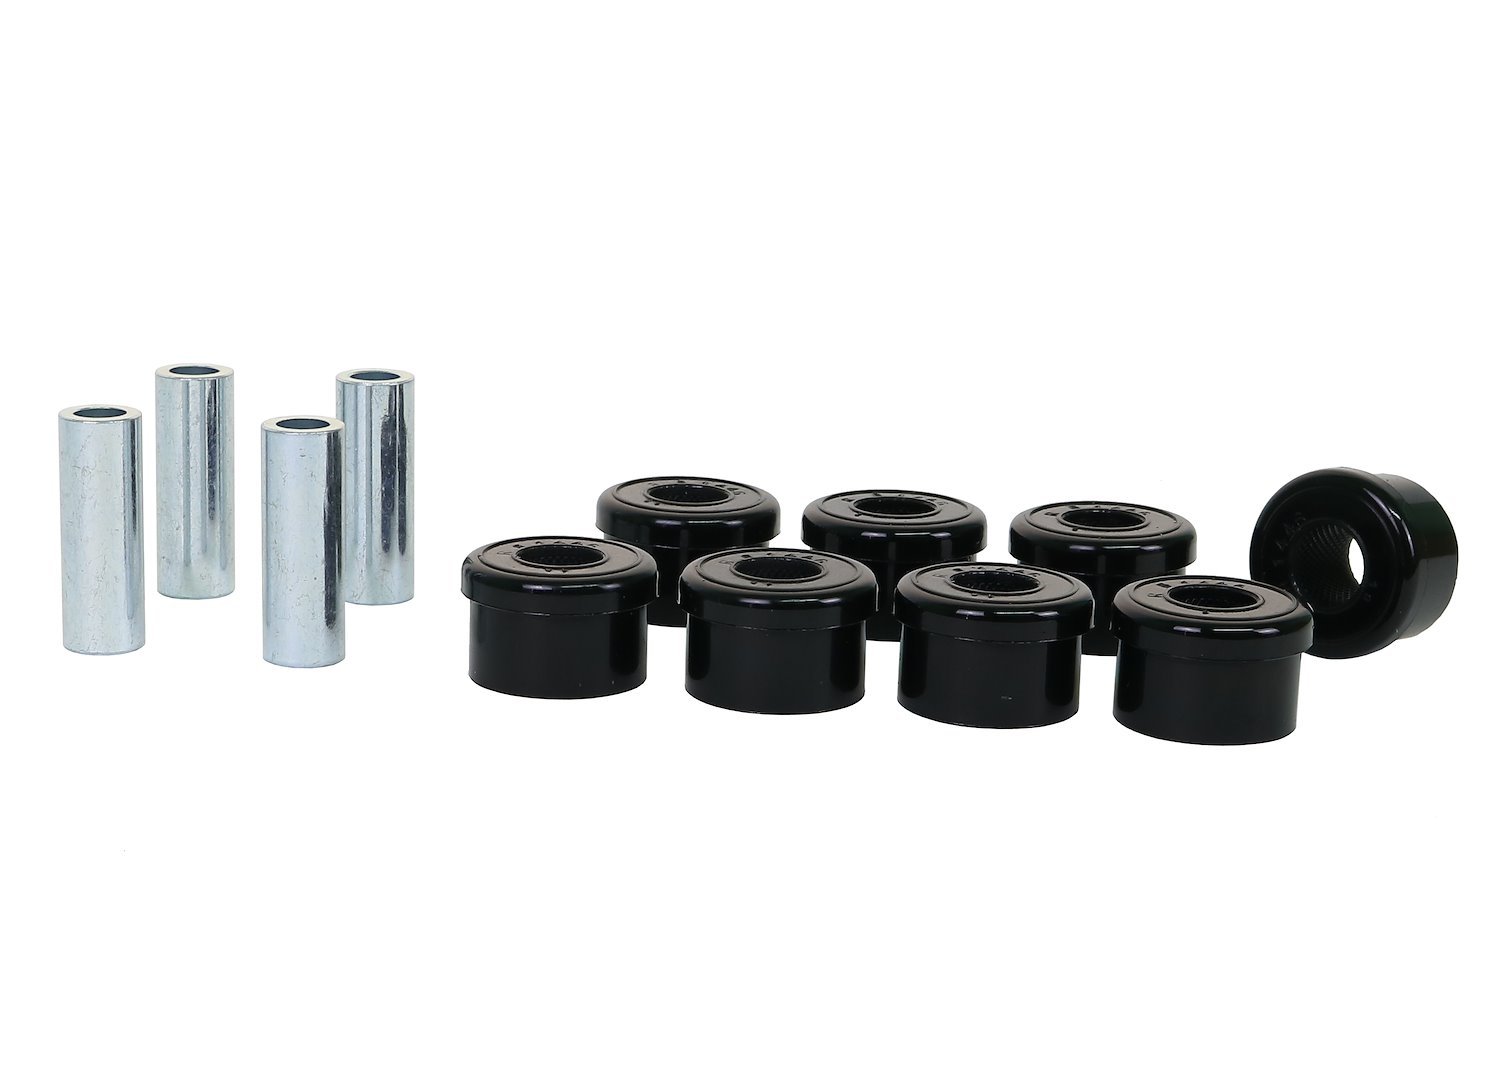 W61446 Rear Lower Trailing Arm Bushing Kit for 1988-1994 Toyota Camry SV20/21/22 4/6cyl